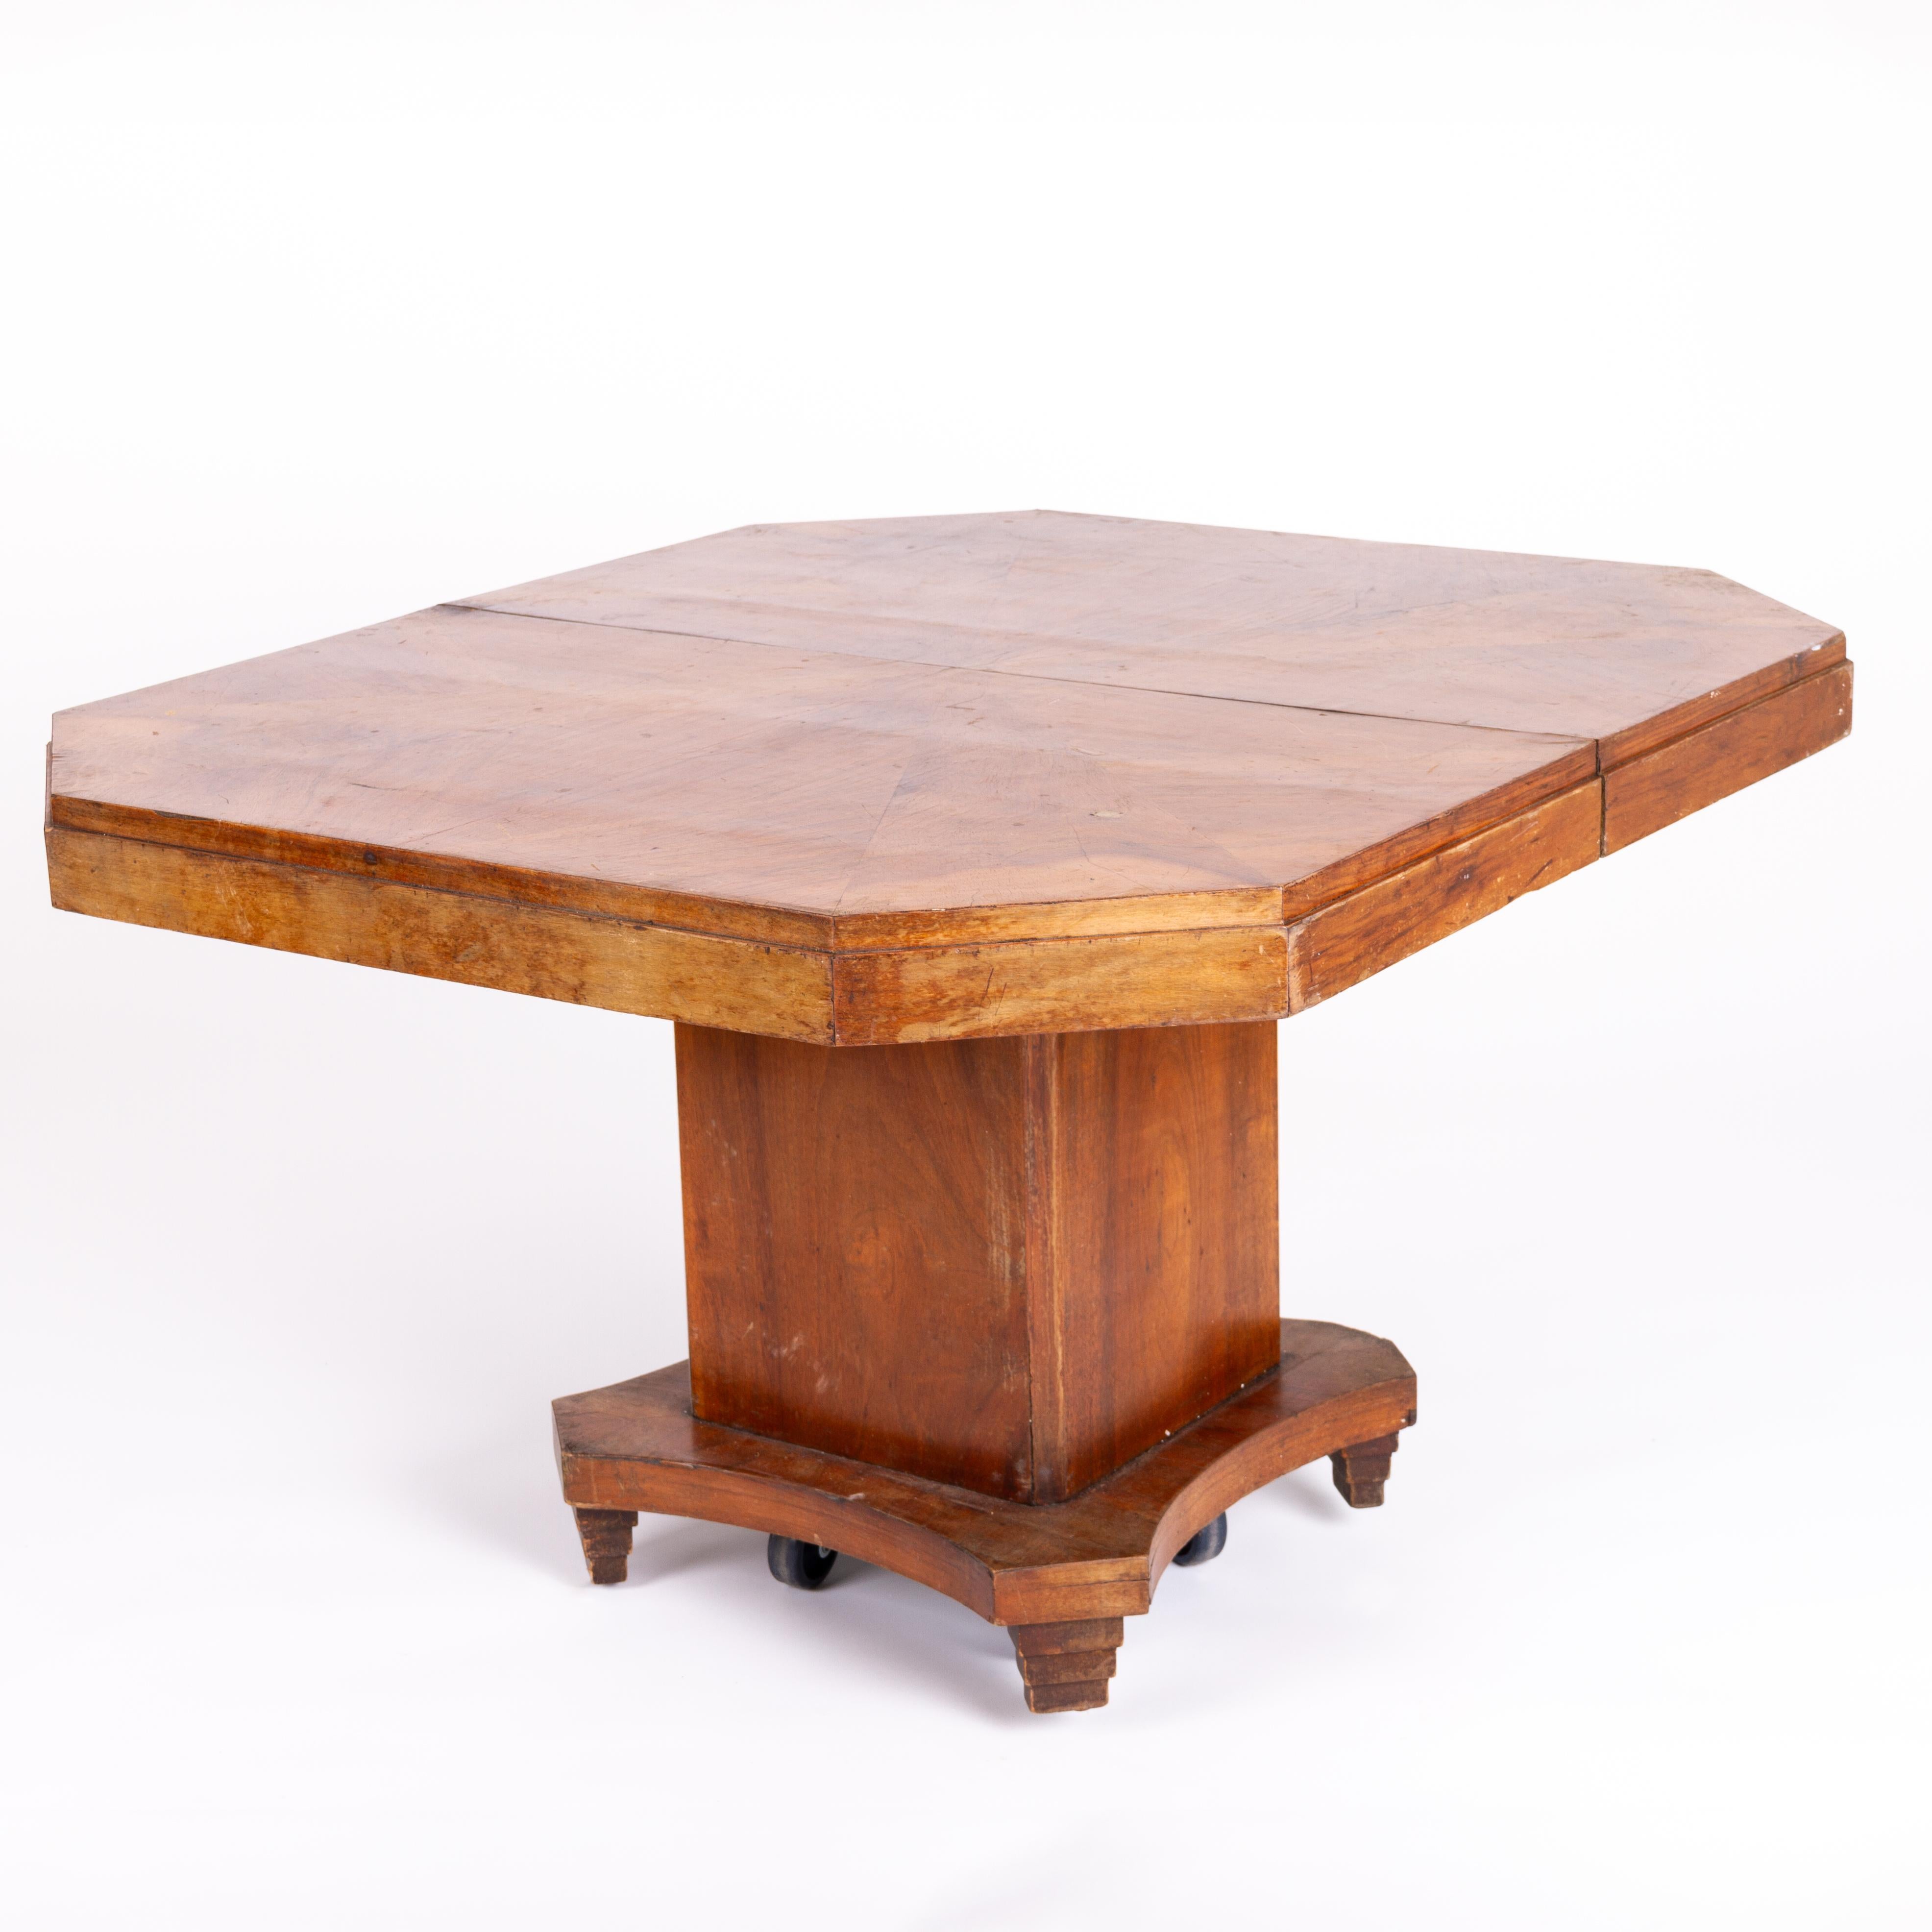 Art Deco Mahogany Dining Table 1930s
Condition as seen, with age-related signs of wear and useage throughout. The table extends but is missing the central panel.
From a private collection.


Free international shipping.